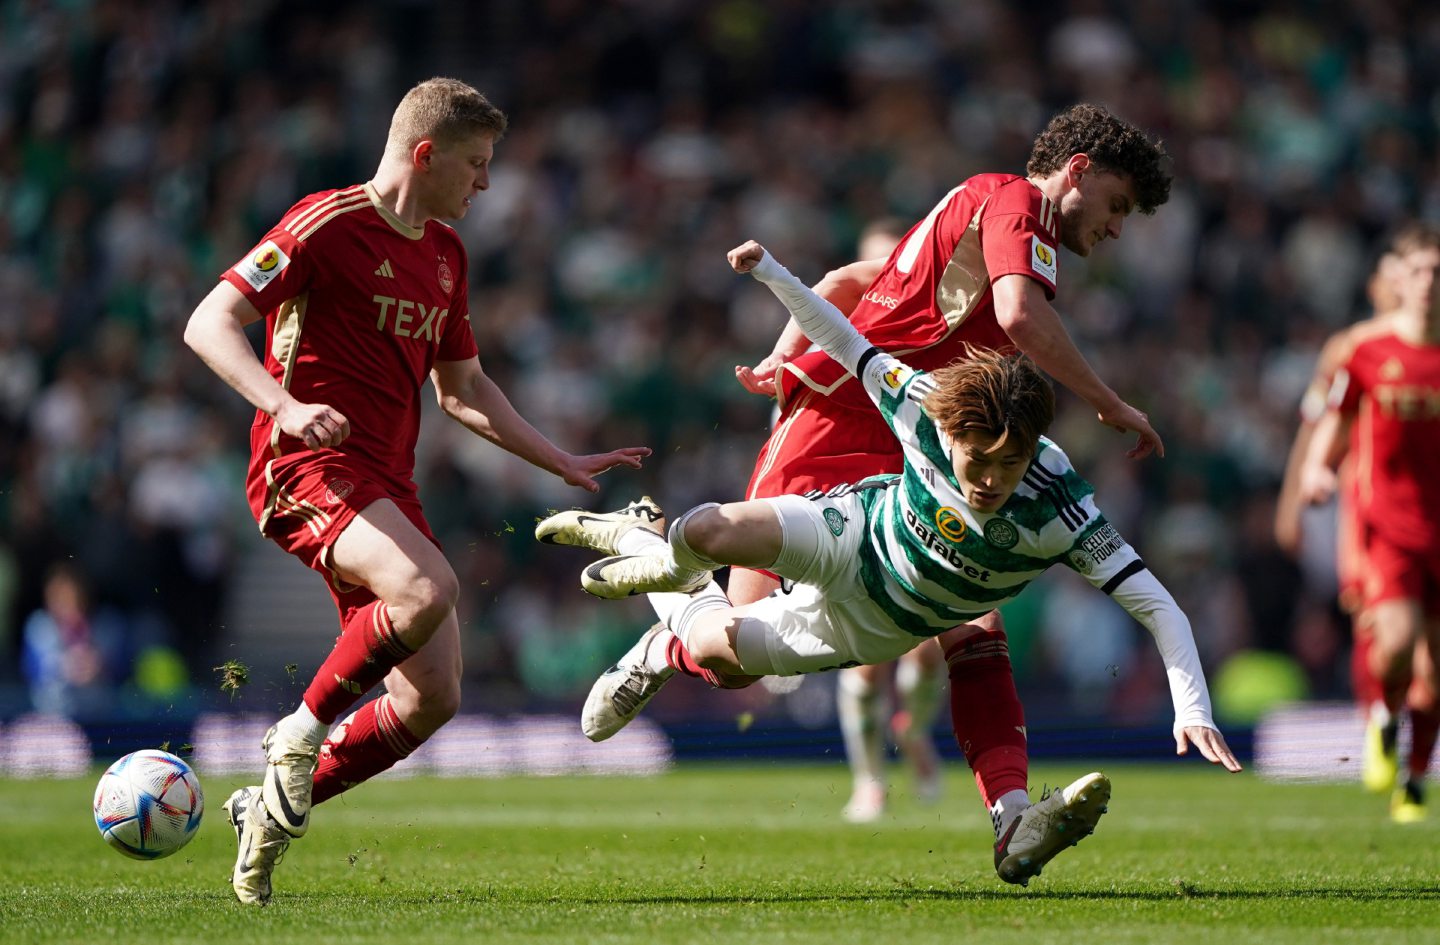 Celtic's Kyogo Furuhashi is challenged by Aberdeen's Dante Polvara (right) during the ScottishCup semi-final match at Hampden. Image: PA 